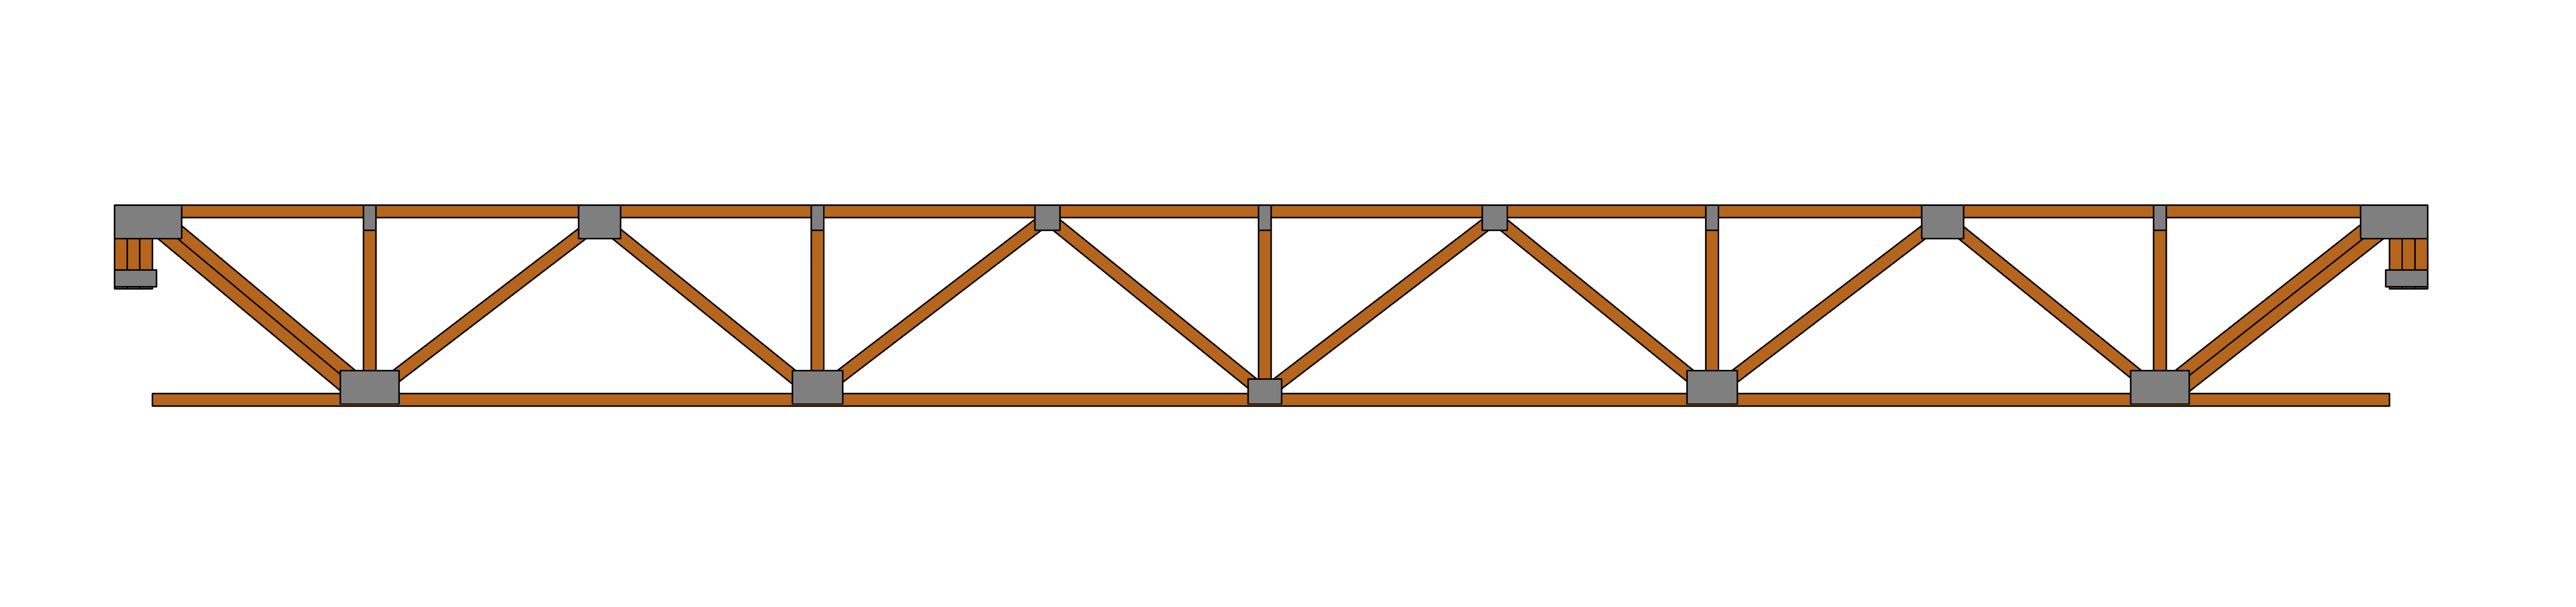 system-42-truss-g2-connect-an-evolution-in-wood-framed-structure